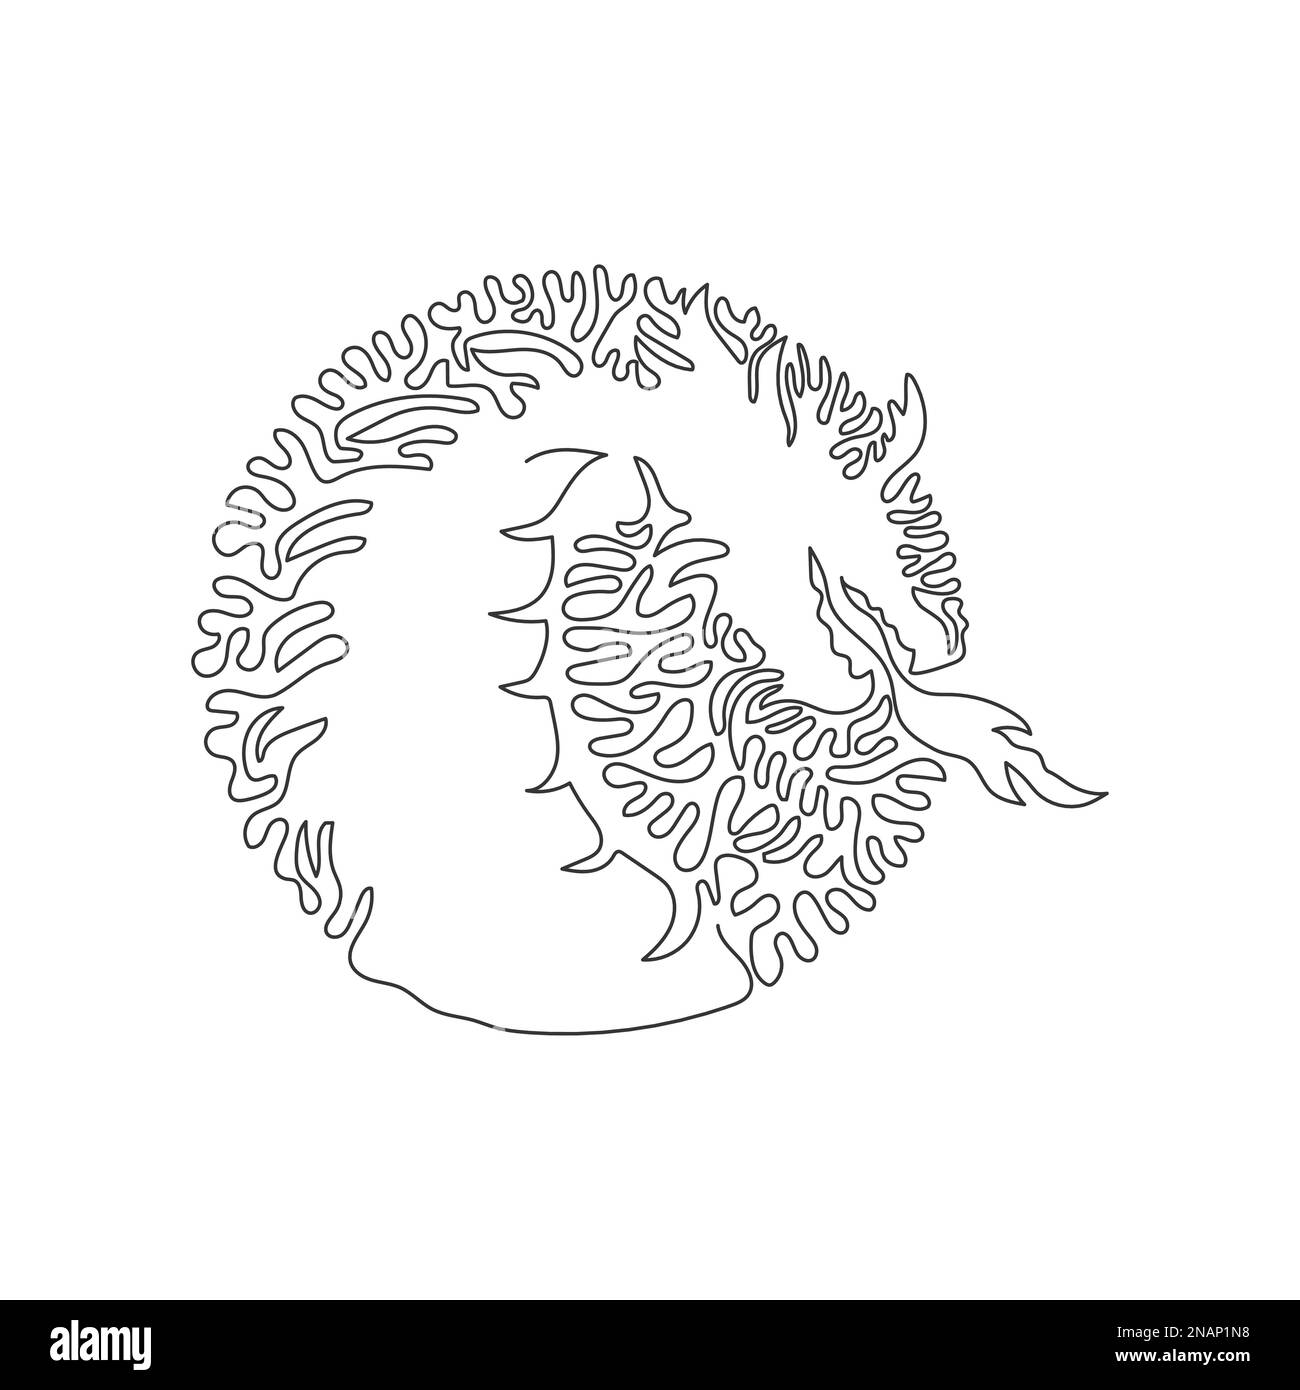 Continuous curve one line drawing of a dragon that spits fire. Single line editable stroke vector illustration of powerful, mythical dragon Stock Vector